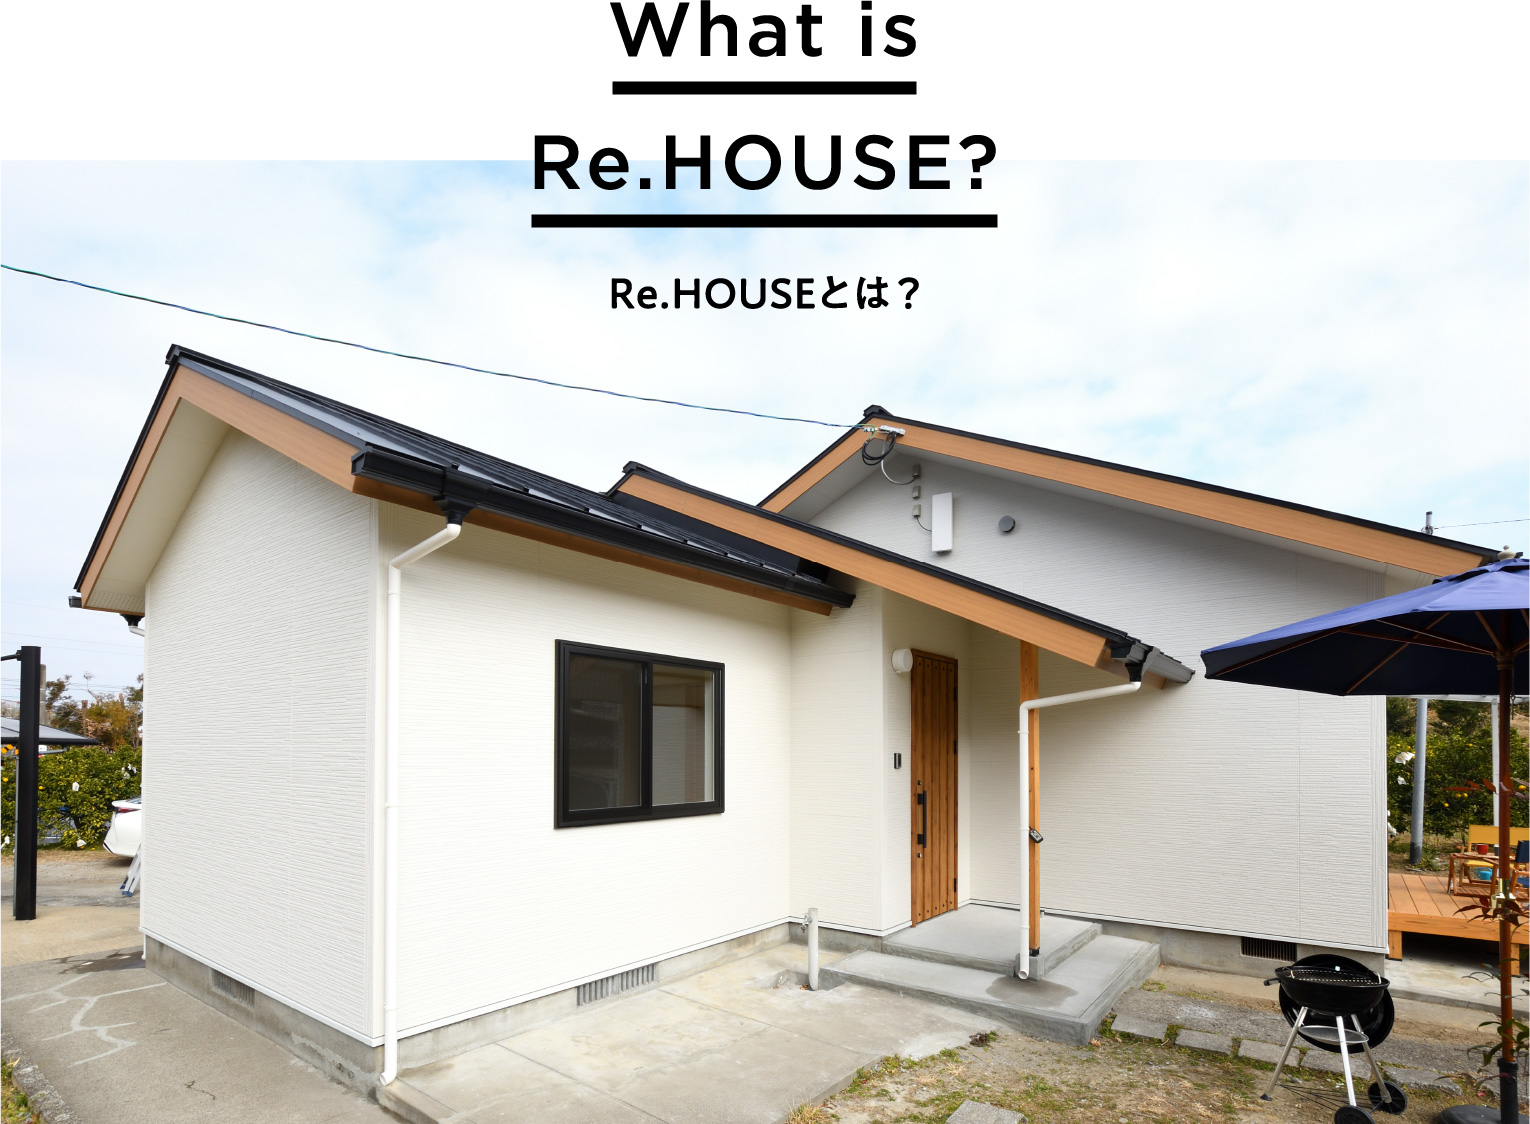 What is Re.HOUSE? Re.HOUSEとは？